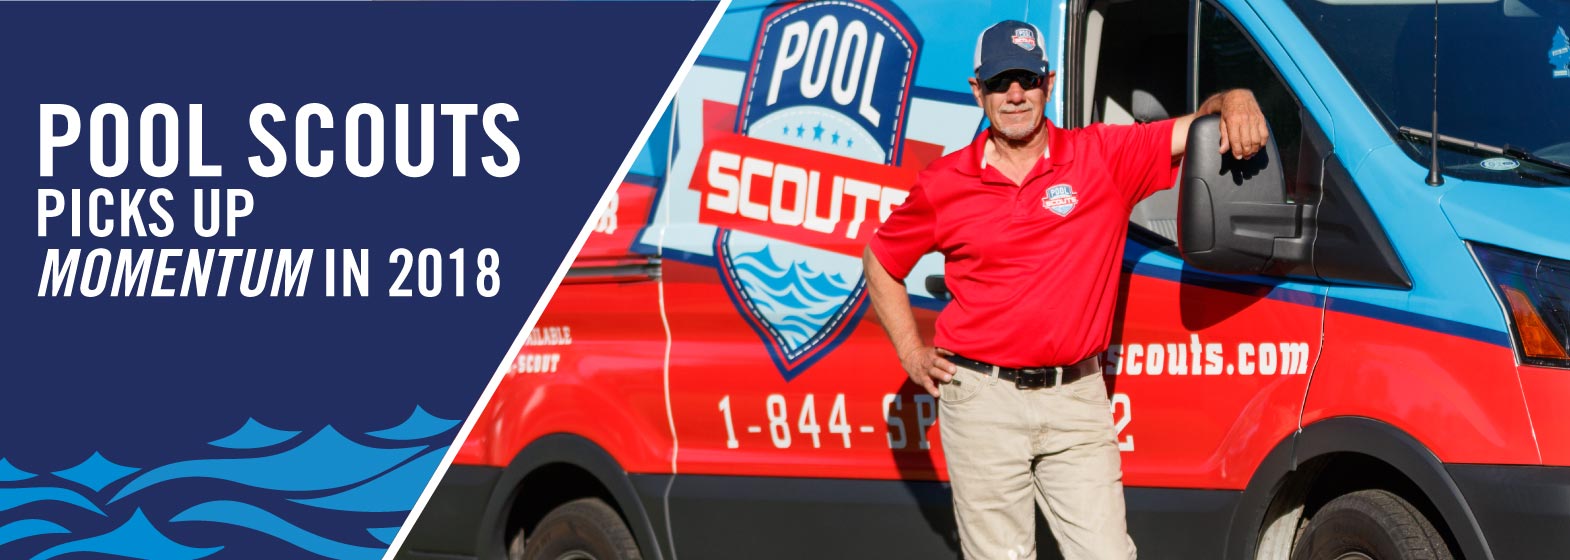 Pool Scouts technician leaning against a Pool Scouts van and smiling